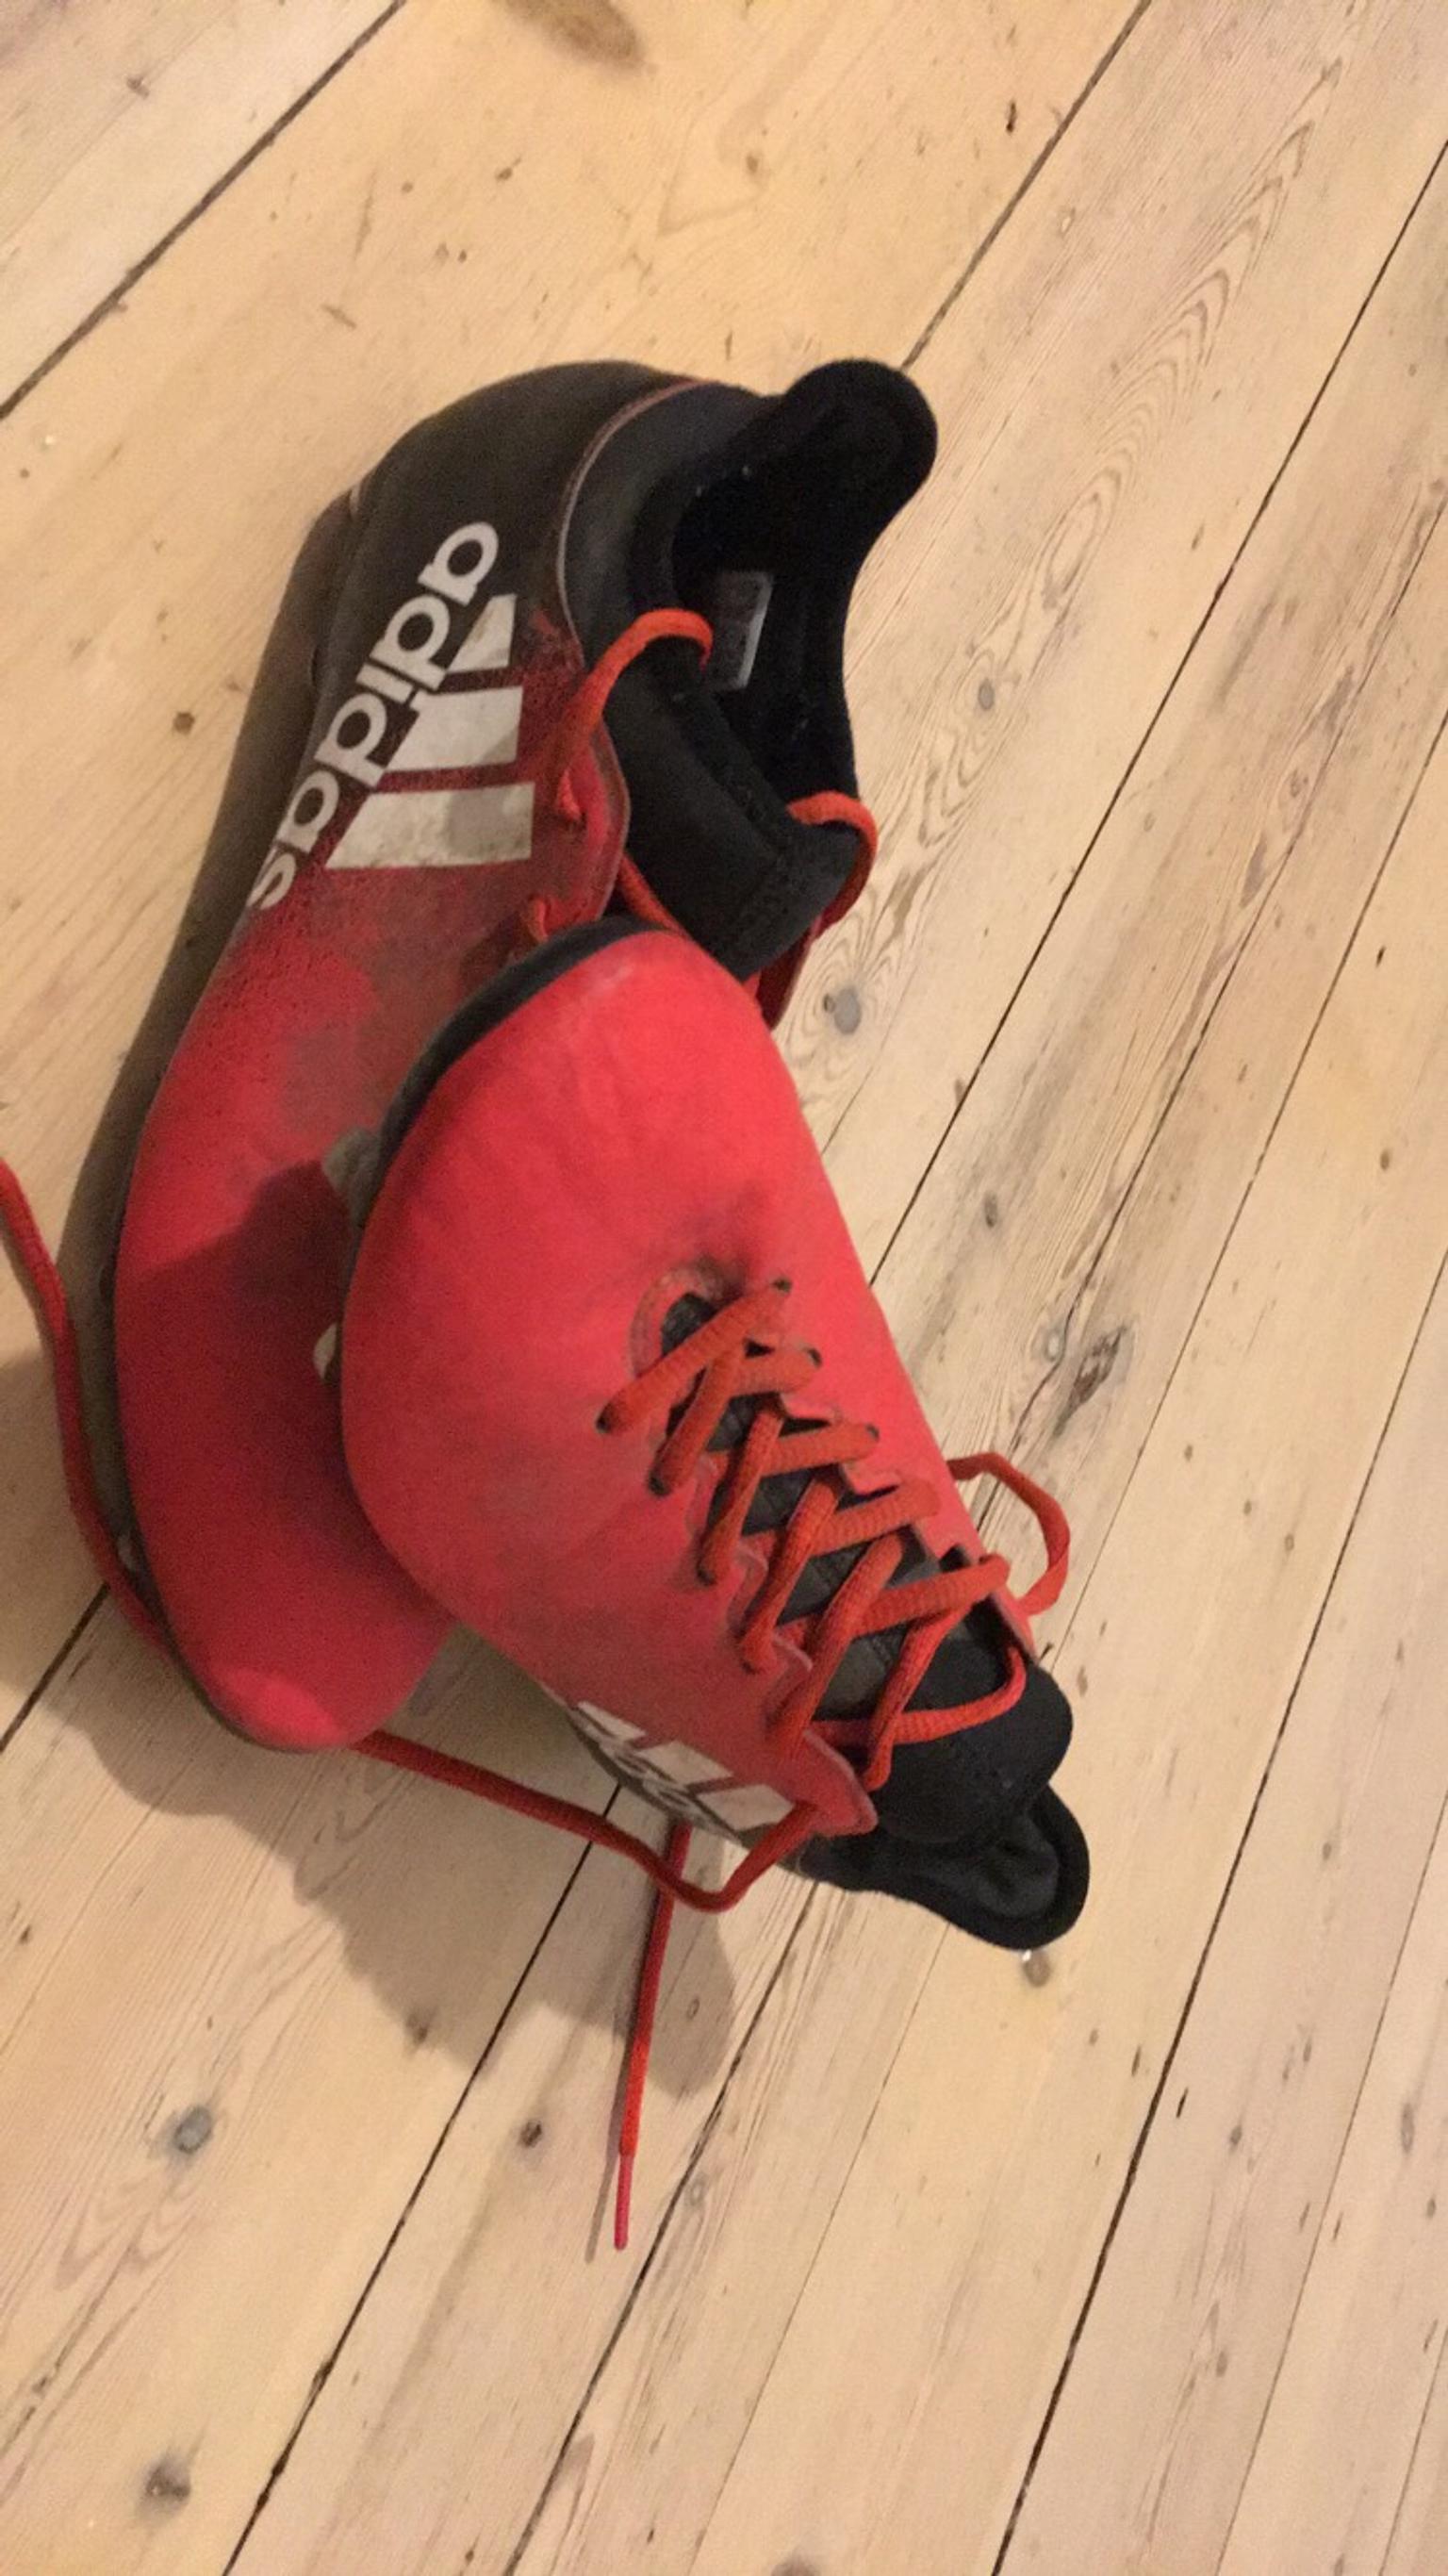 Adidas X 16.3, Size 8 1/2 in AL1 Albans for £16.50 for sale | Shpock